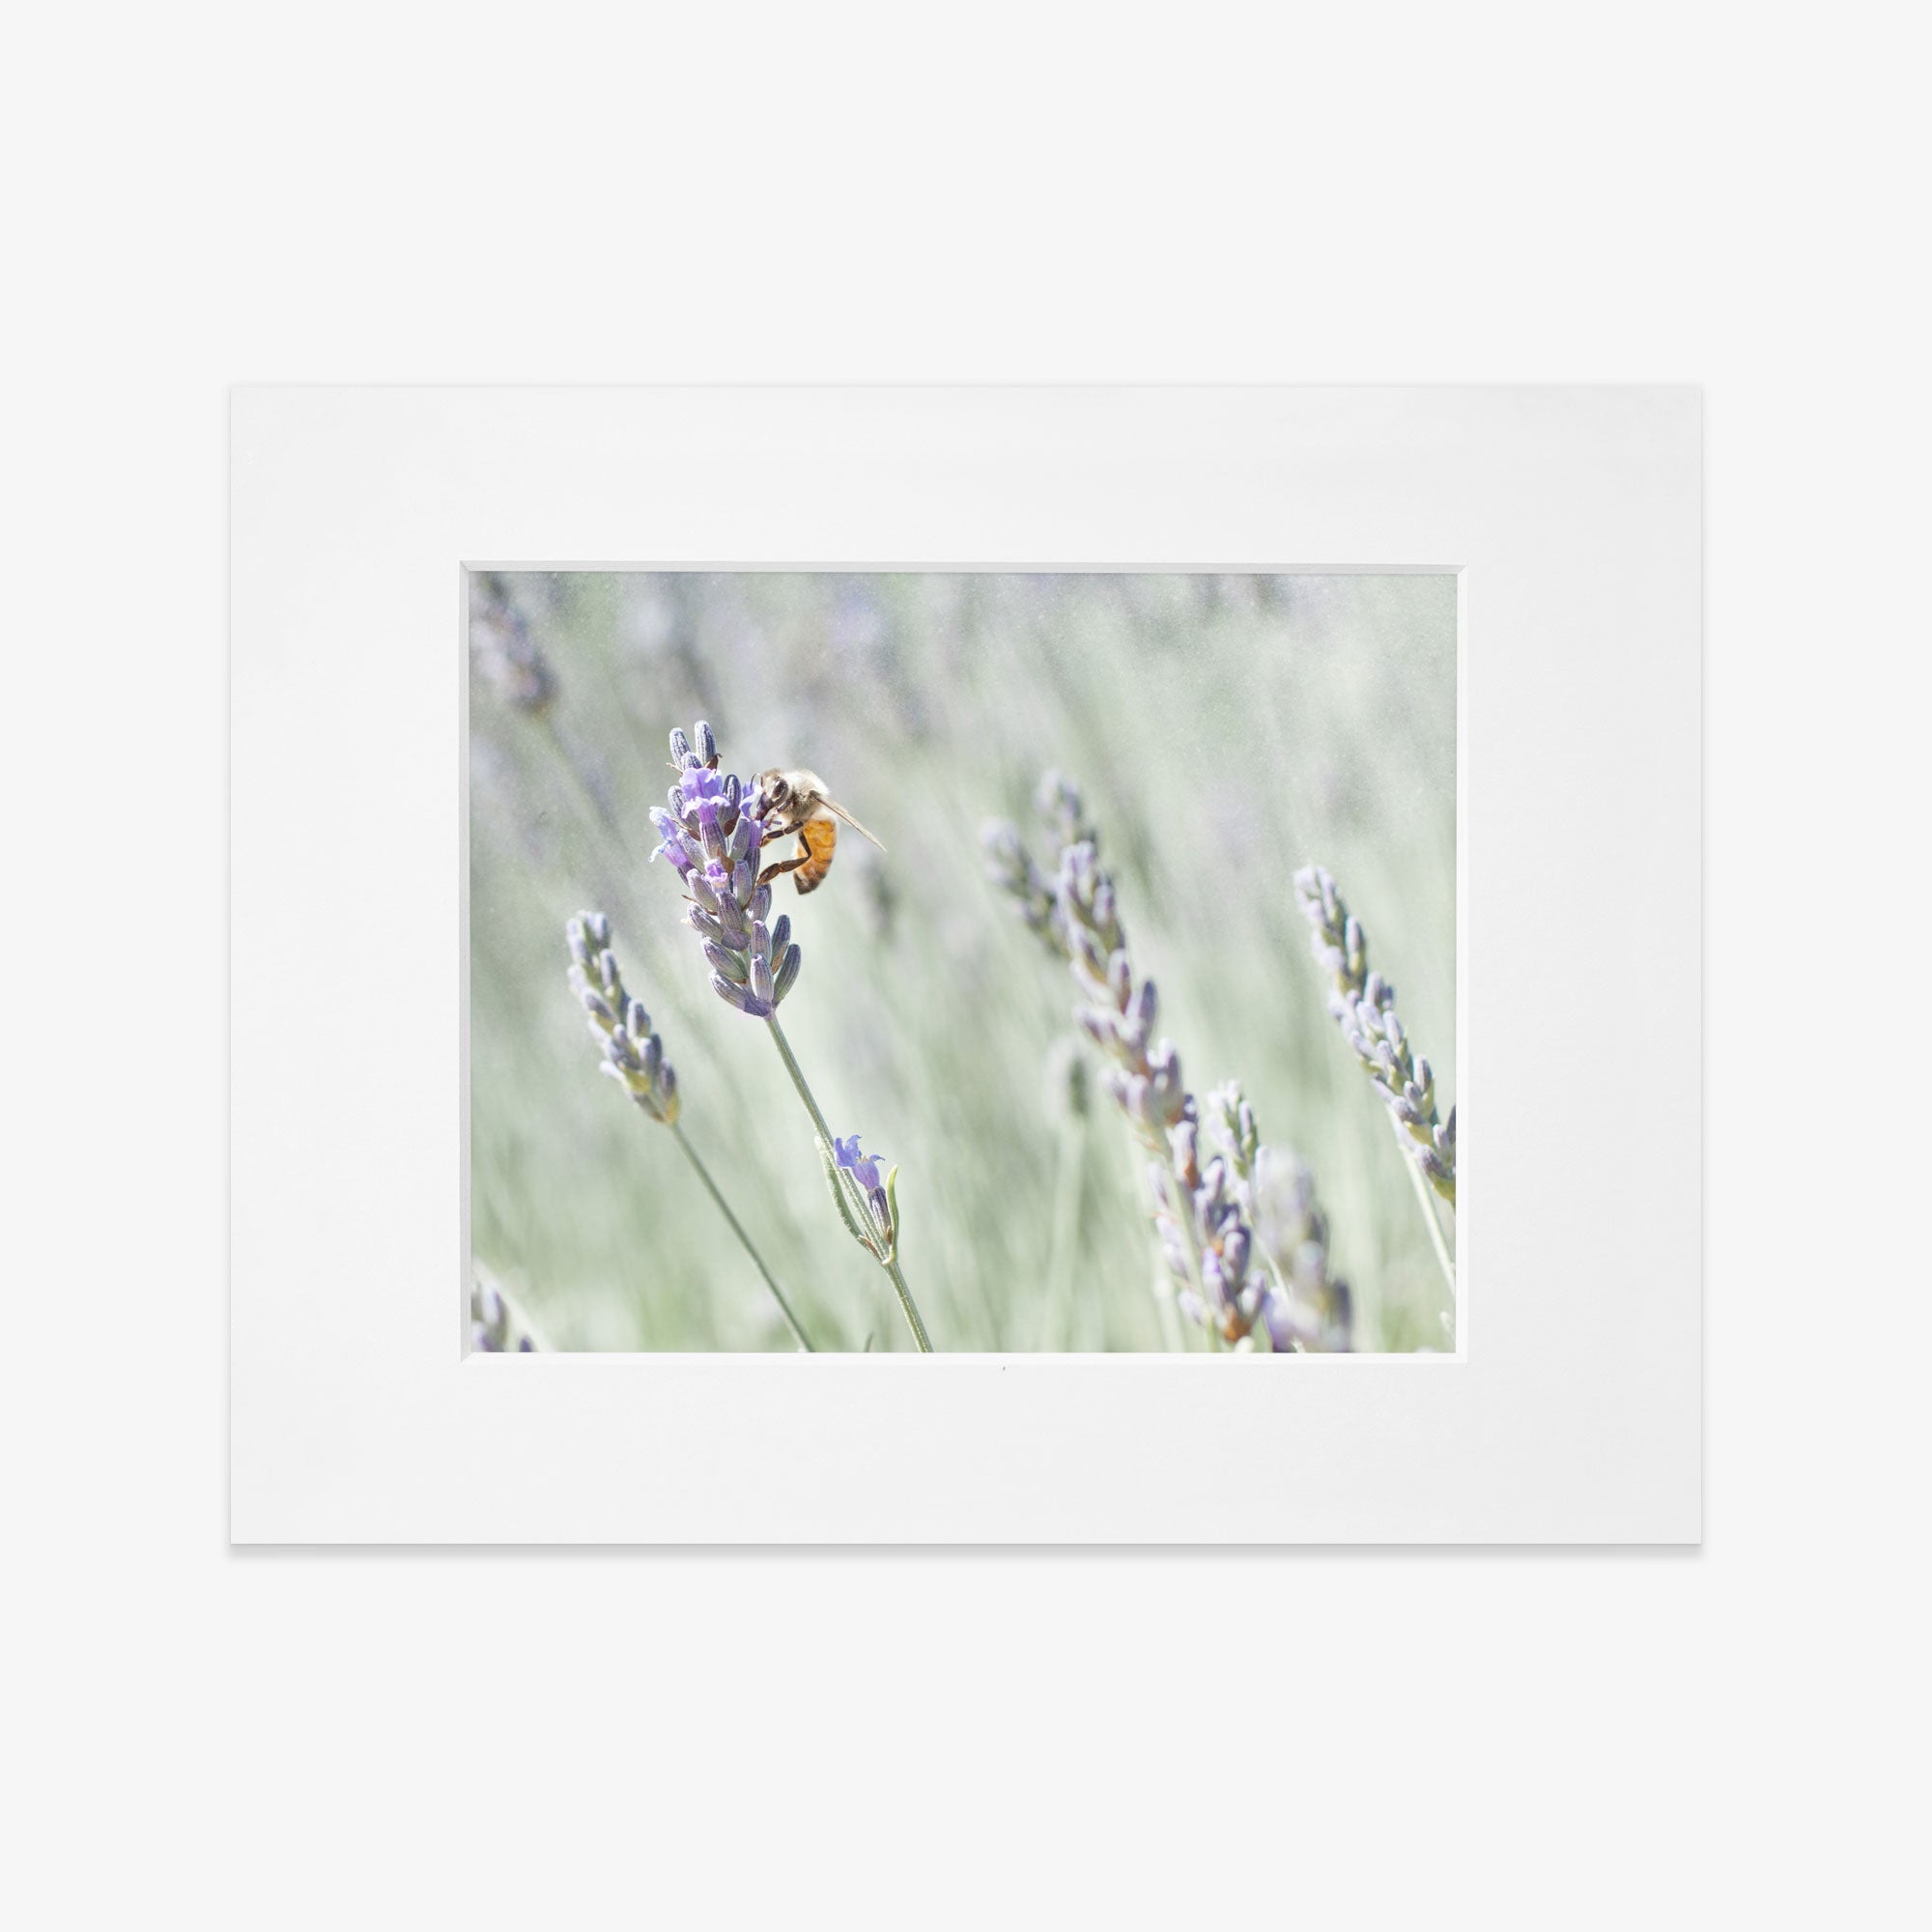 A bee collecting pollen on a lavender flower, set within a white frame, against a blurred green and floral background, printed on archival photographic paper.
Product Name: Offley Green&#39;s Rustic Floral Print, &#39;Lavender for Bees&#39;